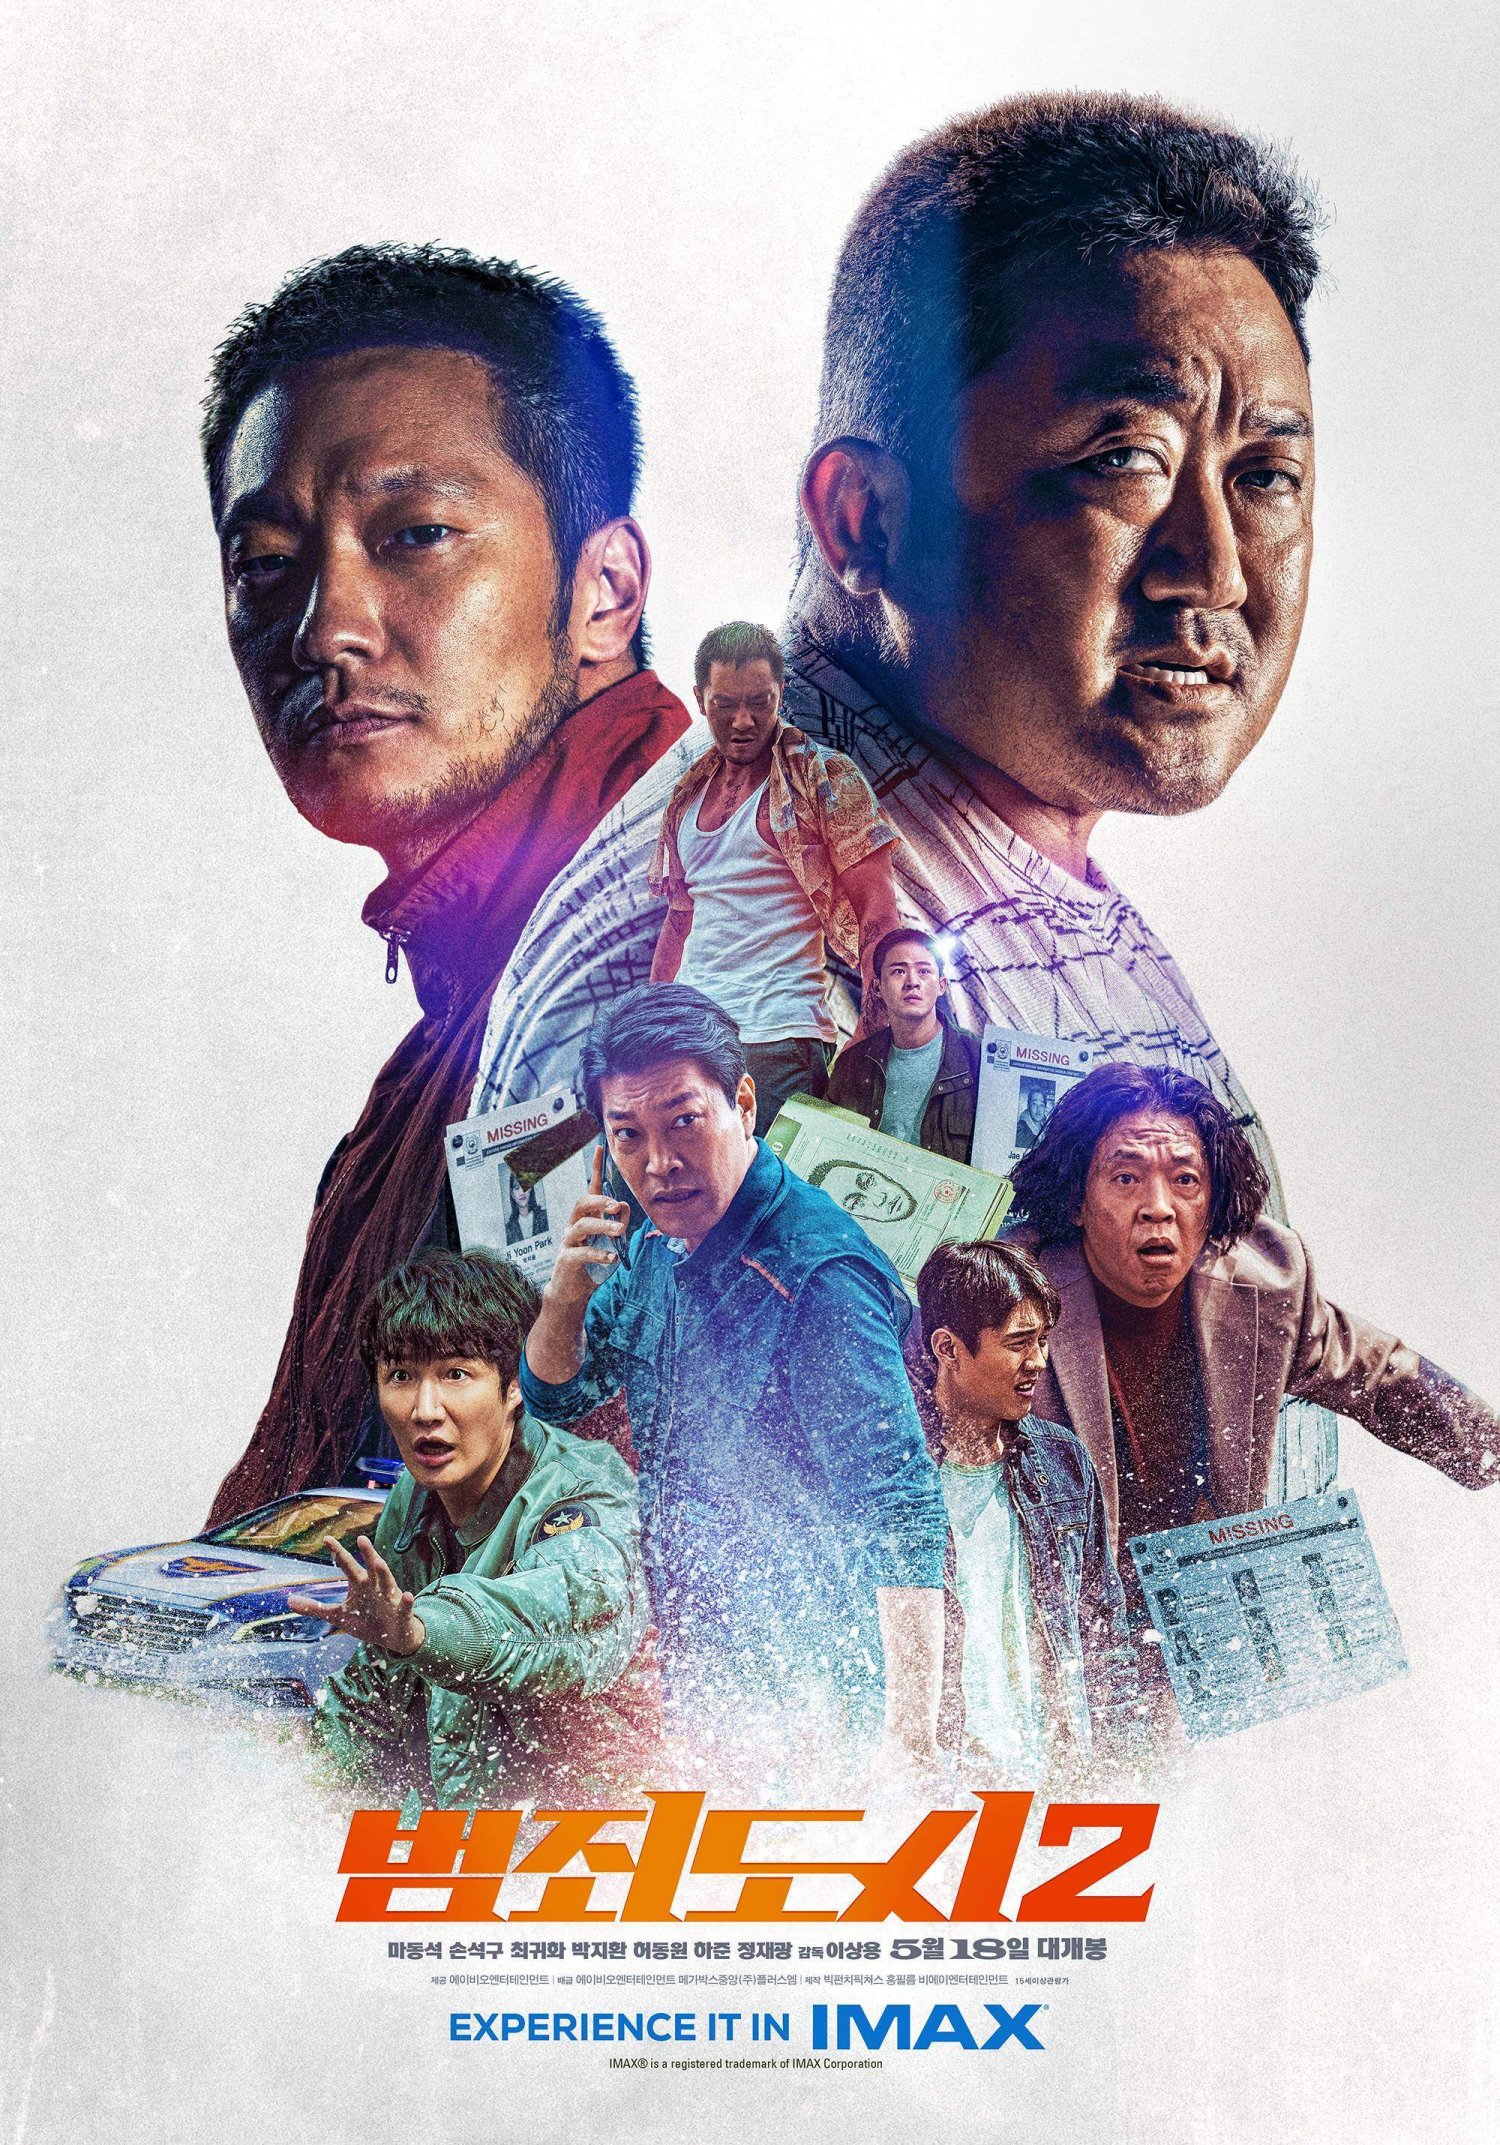 HanCinemas News The Roundup Posts Strong Numbers on South Korean VOD Services HanCinema